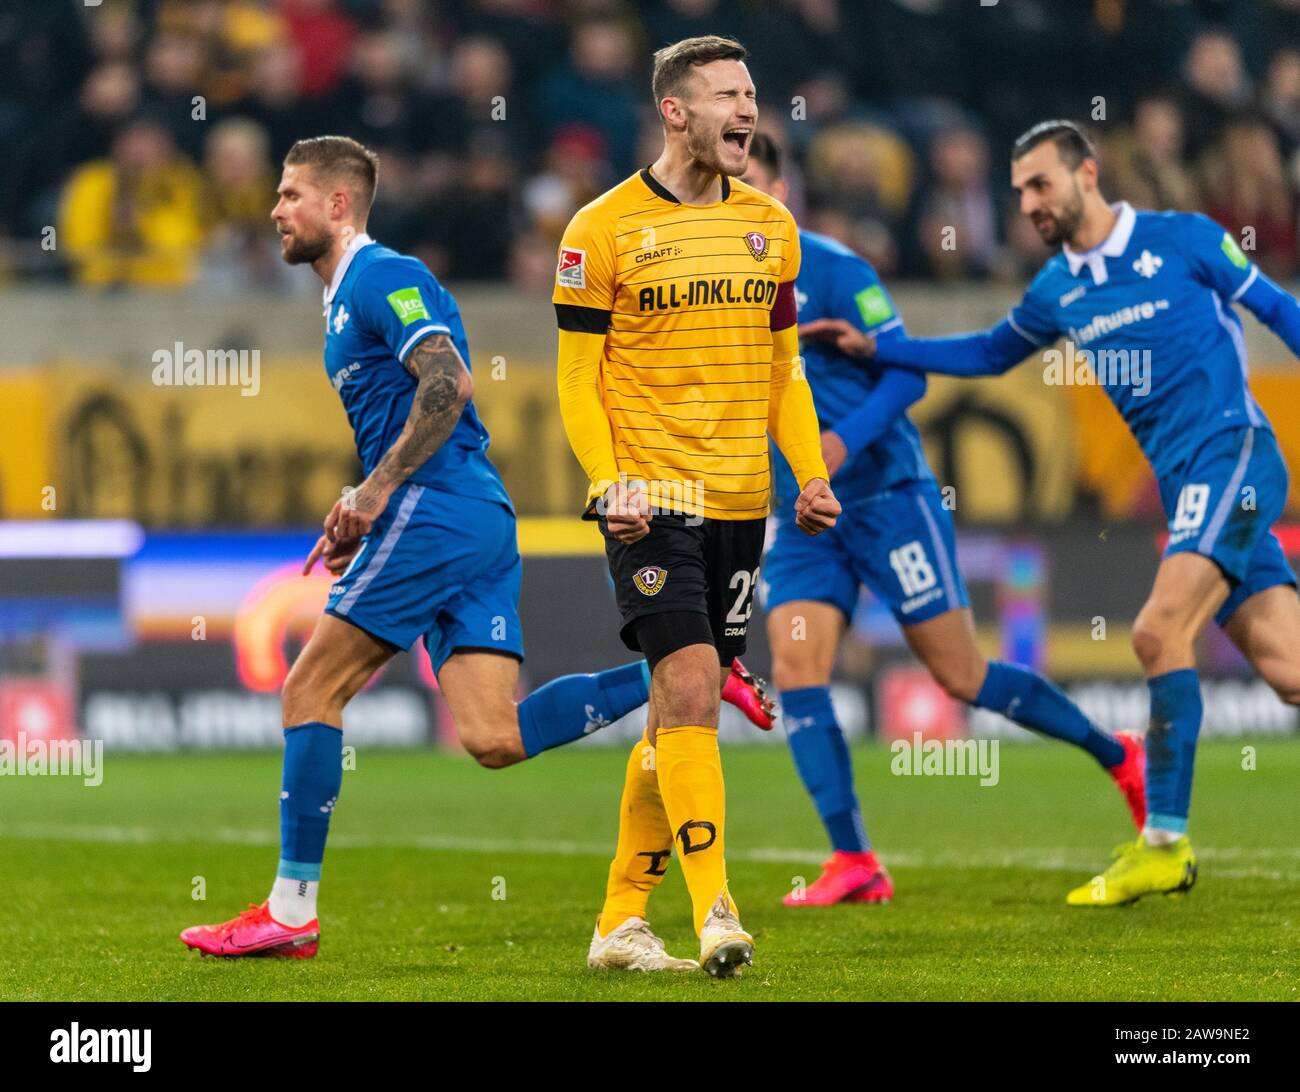 07 February 2020, Saxony, Dresden: Football: 2nd Bundesliga, SG Dynamo Dresden - SV Darmstadt 98, 21st matchday, at the Rudolf Harbig Stadium. Dynamos Florian Ballas reacts furiously while Darmstadt's Tobias Kempe (l) turns off to cheers after his goal for 1:2. Photo: Robert Michael/dpa-Zentralbild/dpa - IMPORTANT NOTE: In accordance with the regulations of the DFL Deutsche Fußball Liga and the DFB Deutscher Fußball-Bund, it is prohibited to exploit or have exploited in the stadium and/or from the game taken photographs in the form of sequence images and/or video-like photo series. Stock Photo